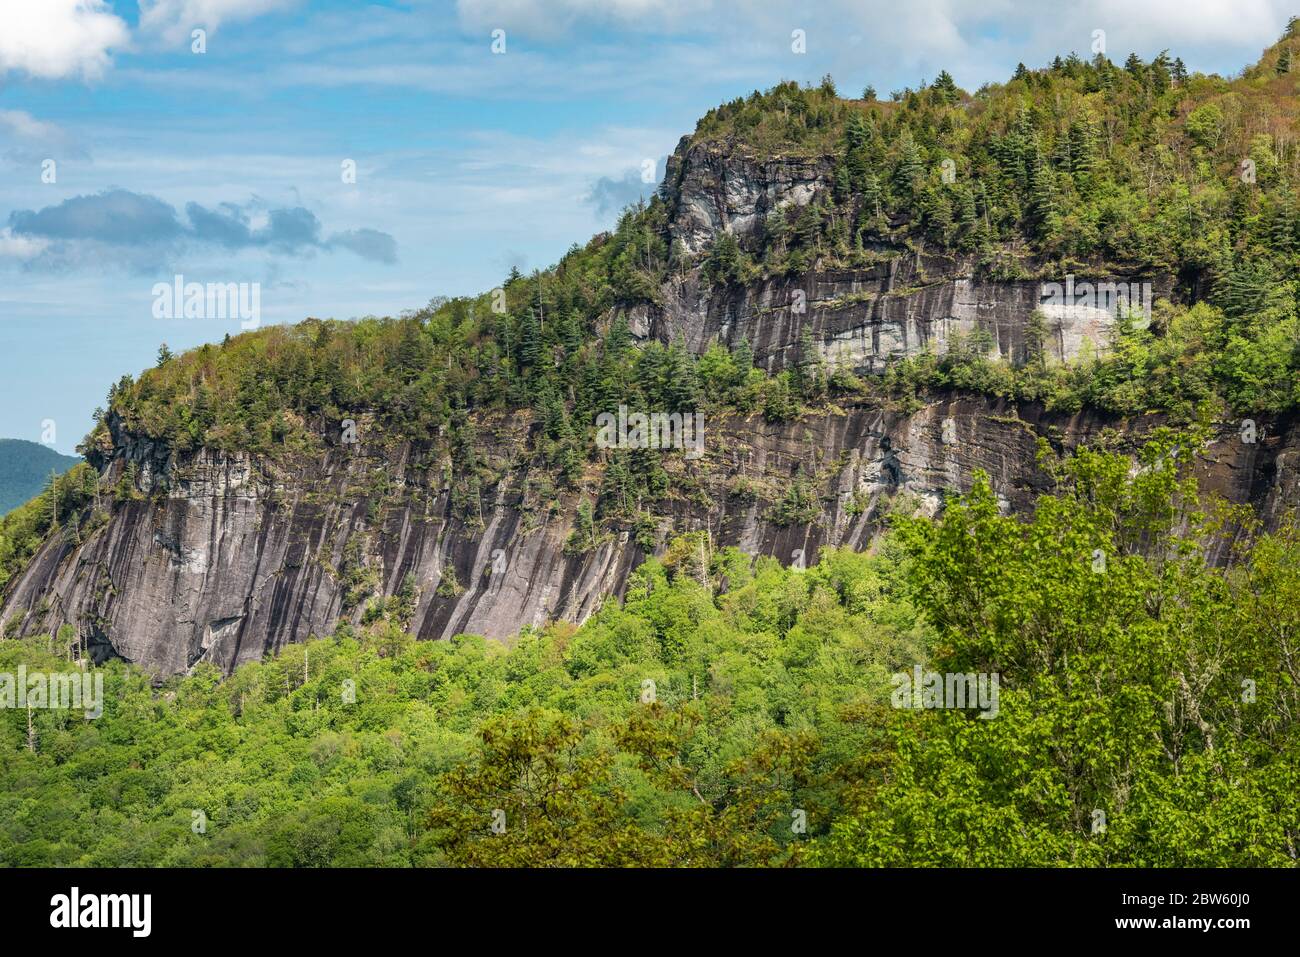 Whiteside Mountain in the Nantahala National Forest between Highlands and Cashiers, North Carolina. (USA) Stock Photo